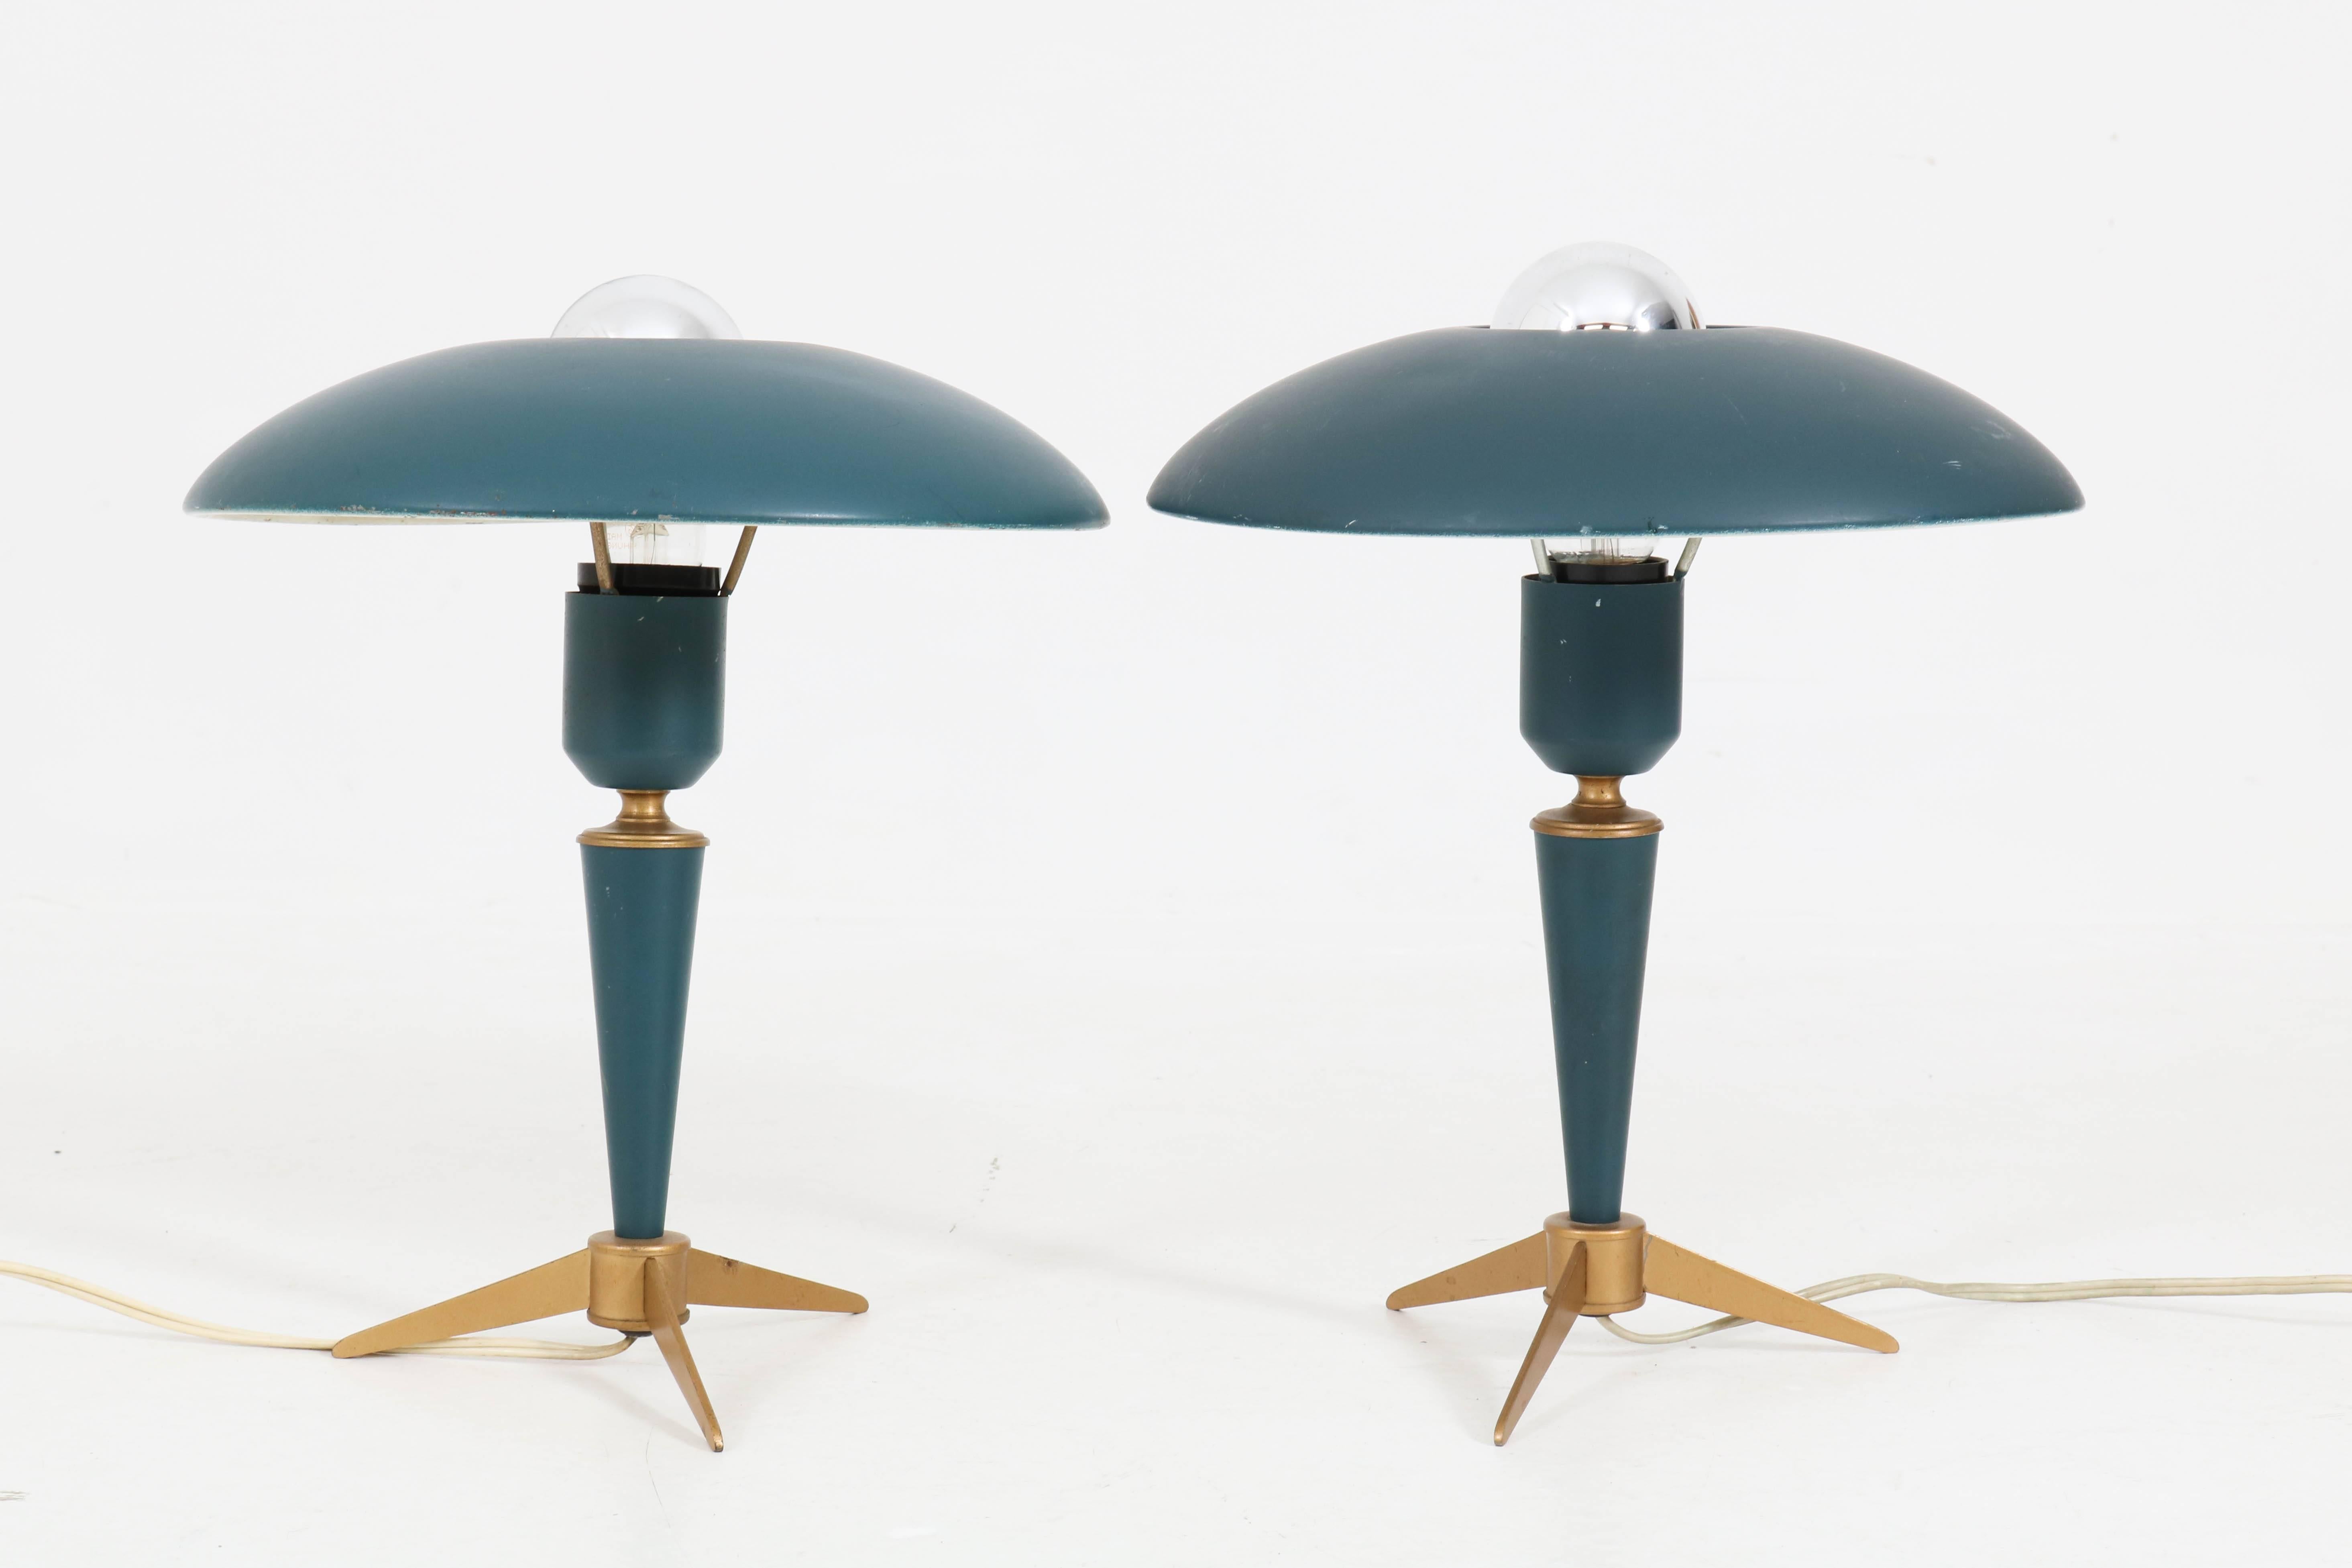 Funky pair of desk lamps by Louis Kalff for Philips.
Striking Dutch design from the fifties.
Tripod brass base with lacquered blue/green metal shade.
In good original condition with minor wear consistent with age and use,
preserving a beautiful